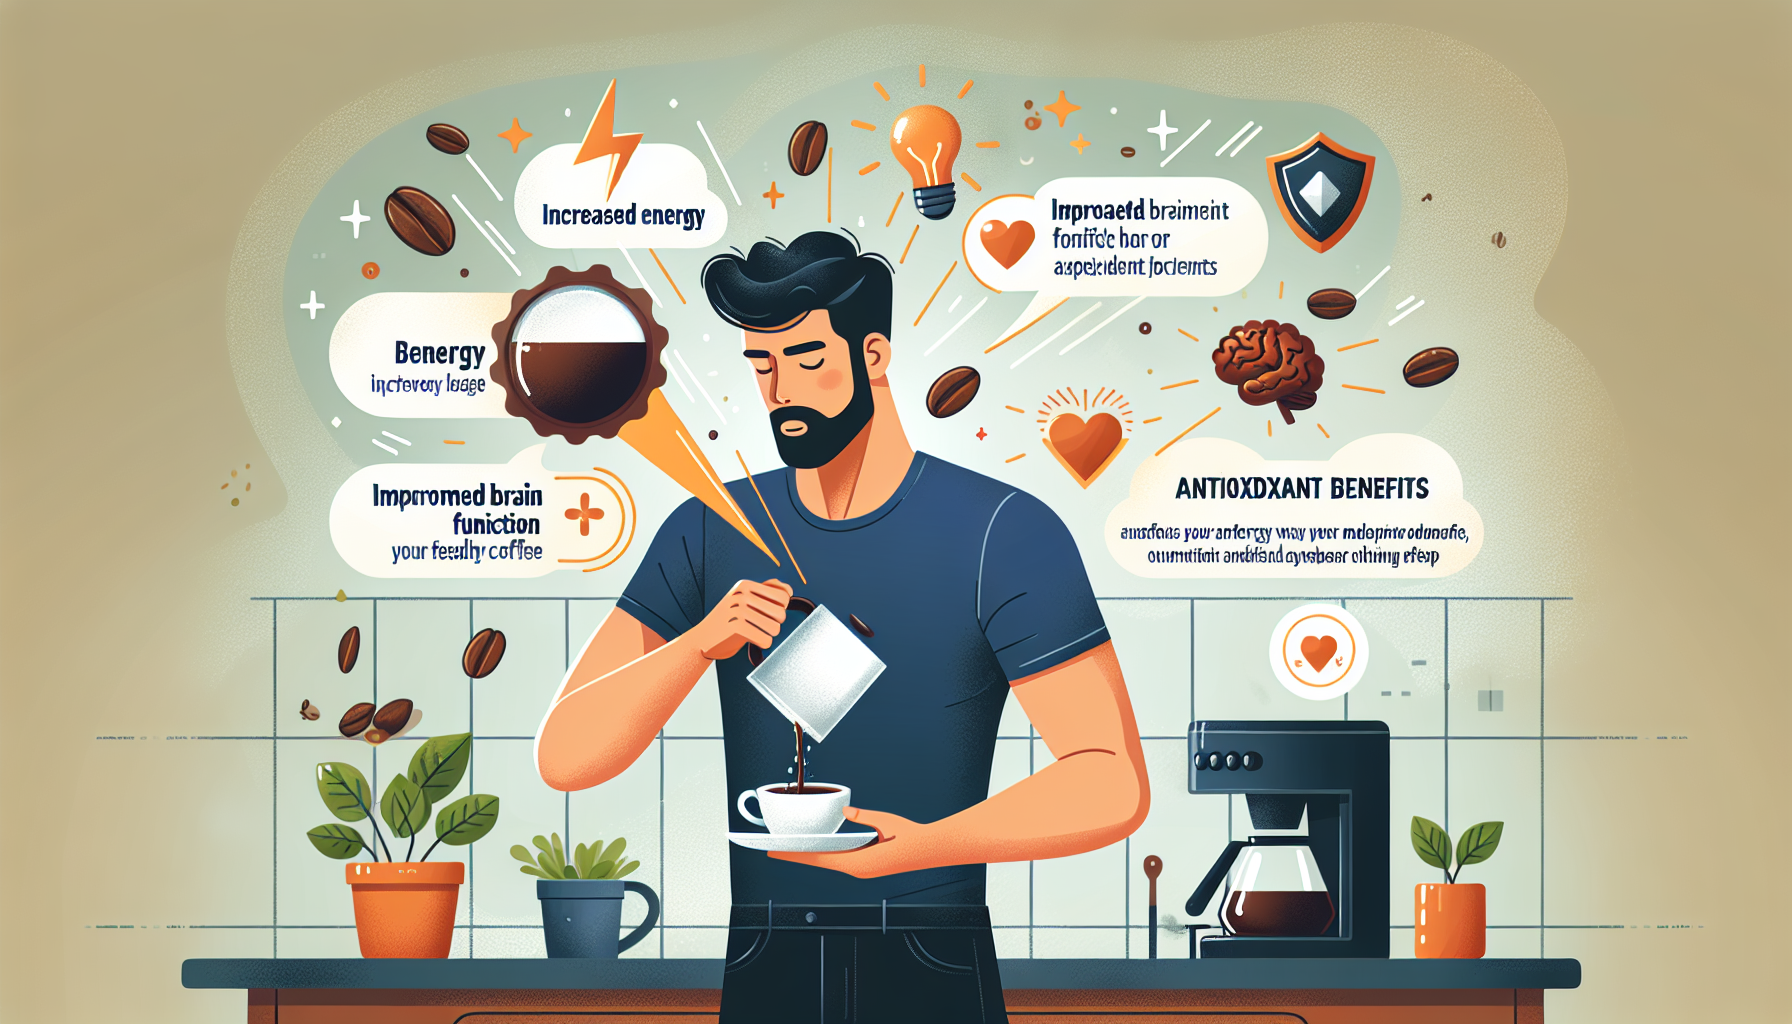 An illustration of the various benefits of healthy bean coffee. A bright kitchen setting with a person of Middle-Eastern descent pouring freshly brewed coffee into a cup. The aroma fills the air while